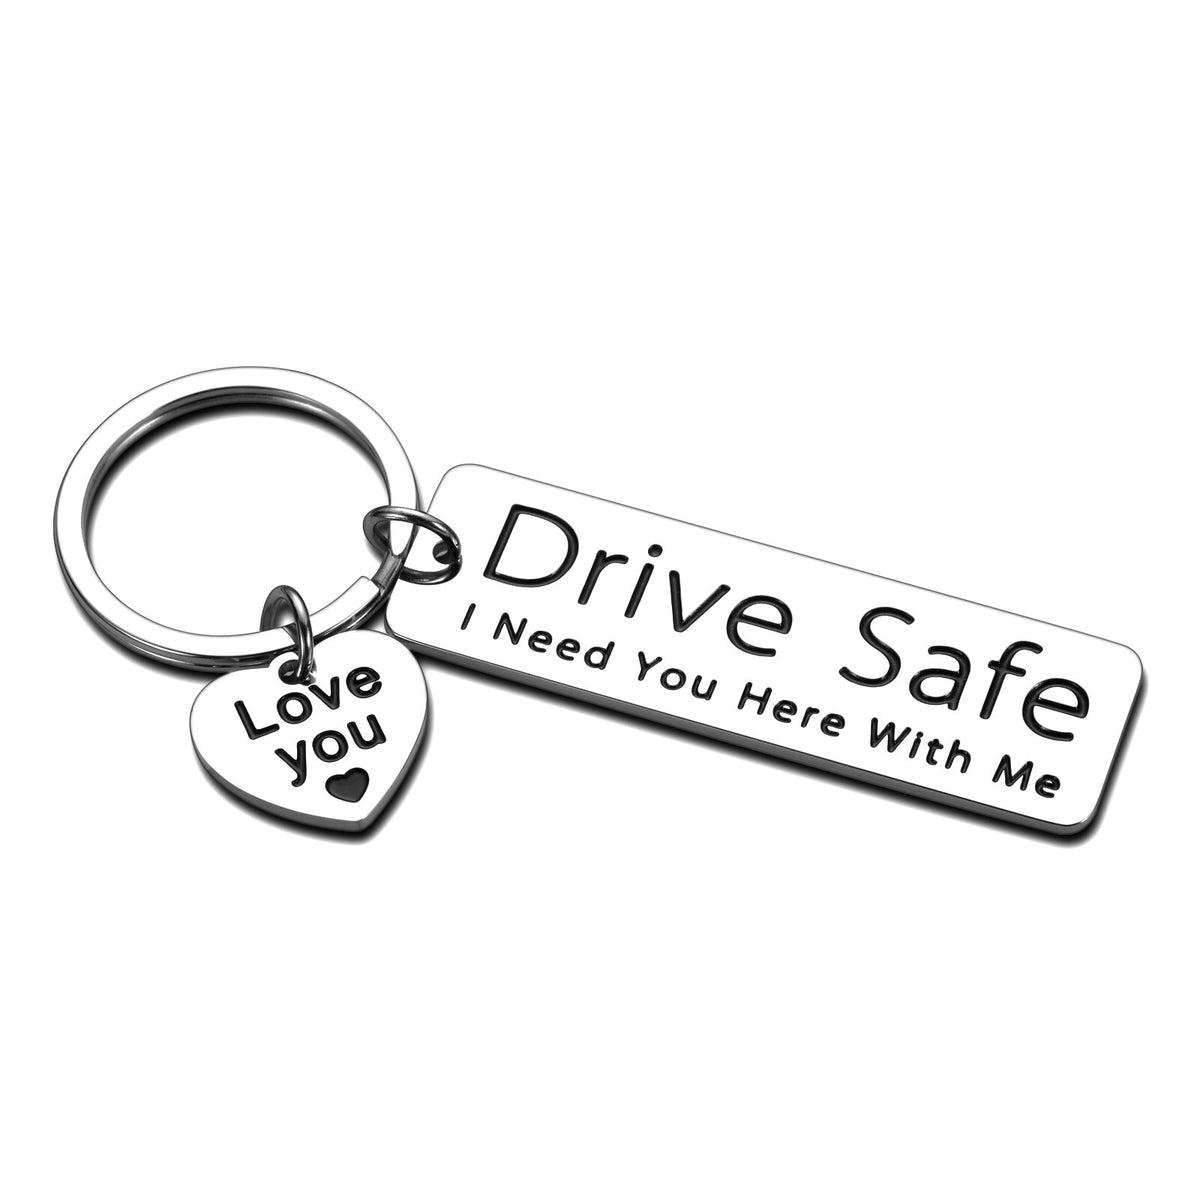 Key Chain Keyrings Gift Drive Safe I Need You Here with Me Keychains Couples Boyfriend Gift for Husband Birthday Christmas